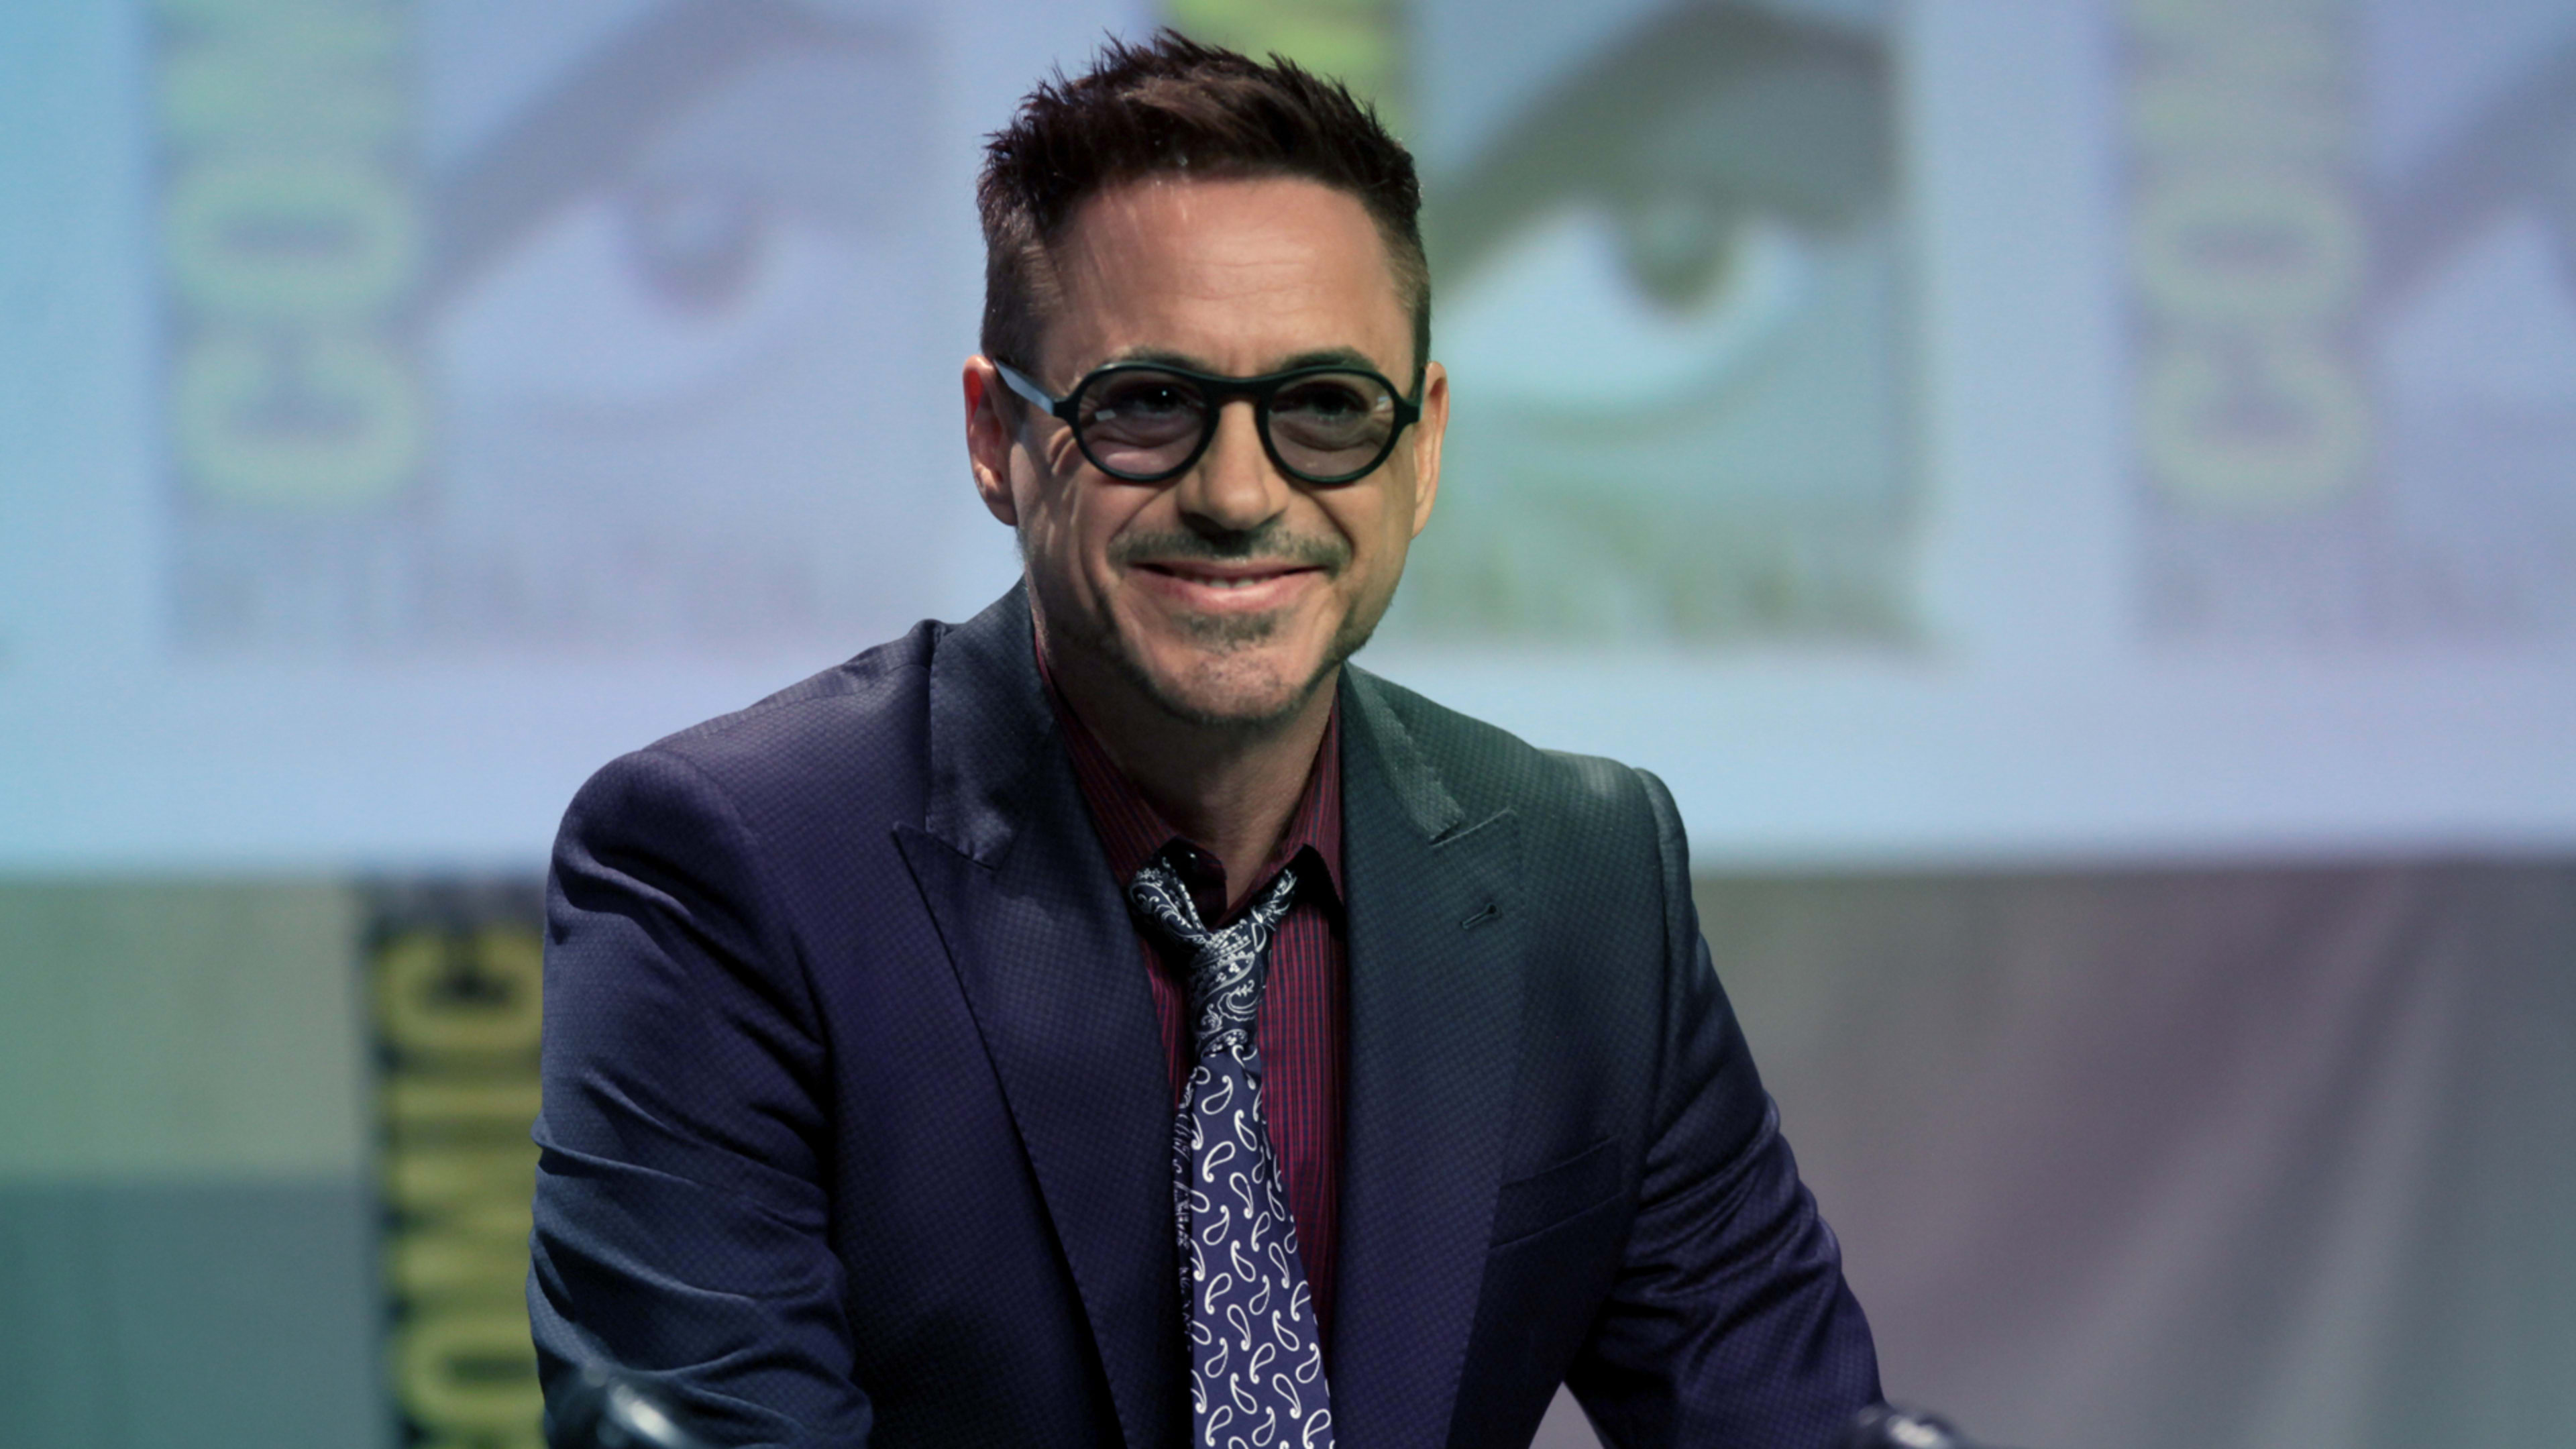 Robert Downey Jr. will host a YouTube Red series about AI